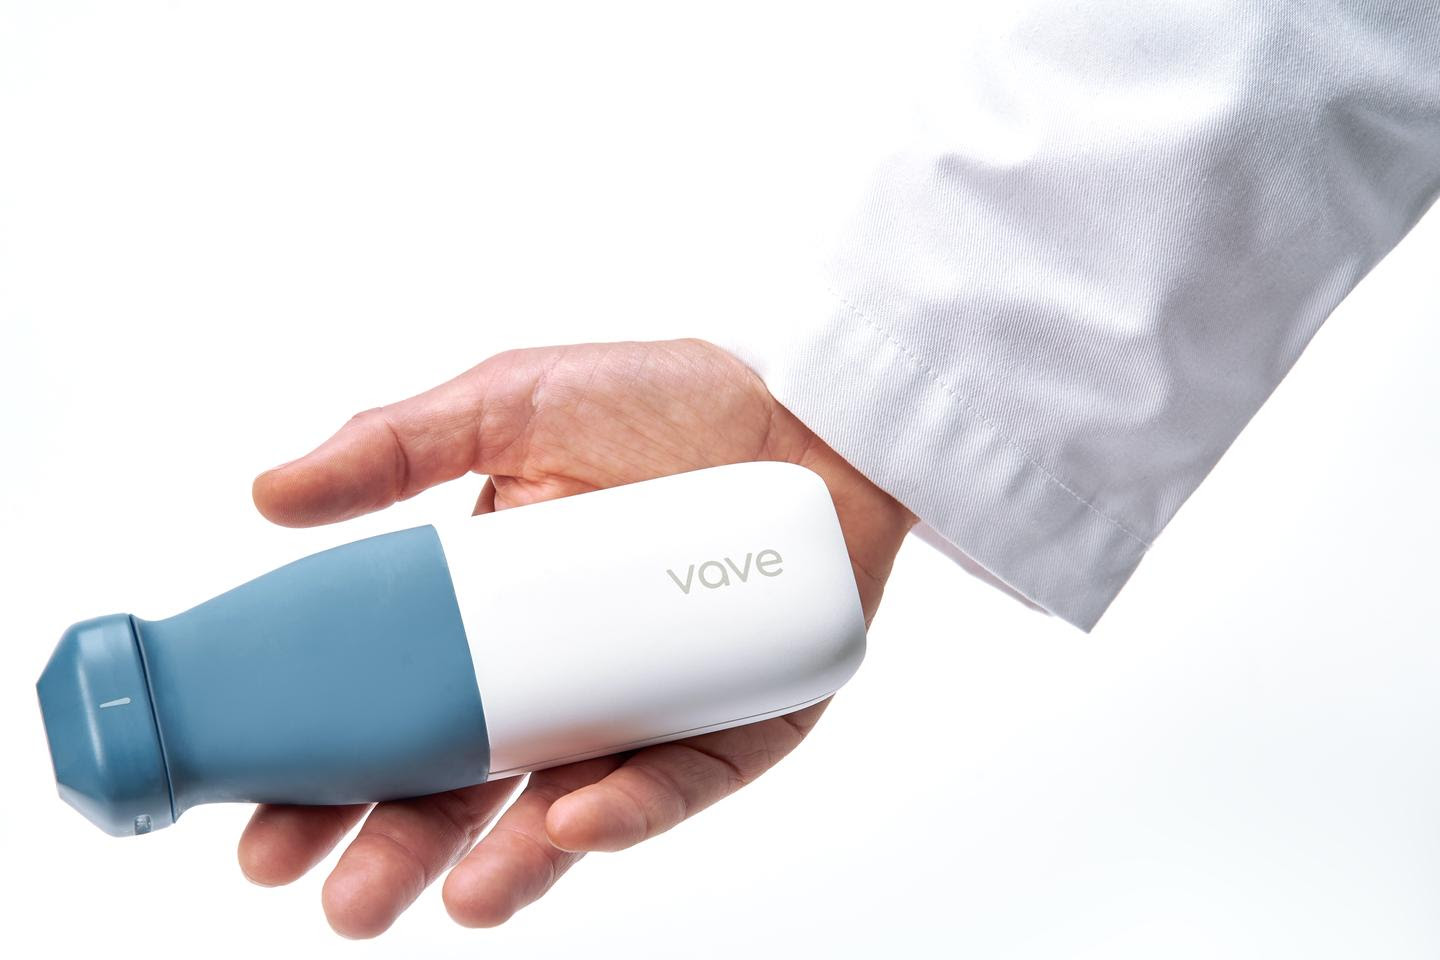 The Vave service includes on-demand access to ultrasound experts